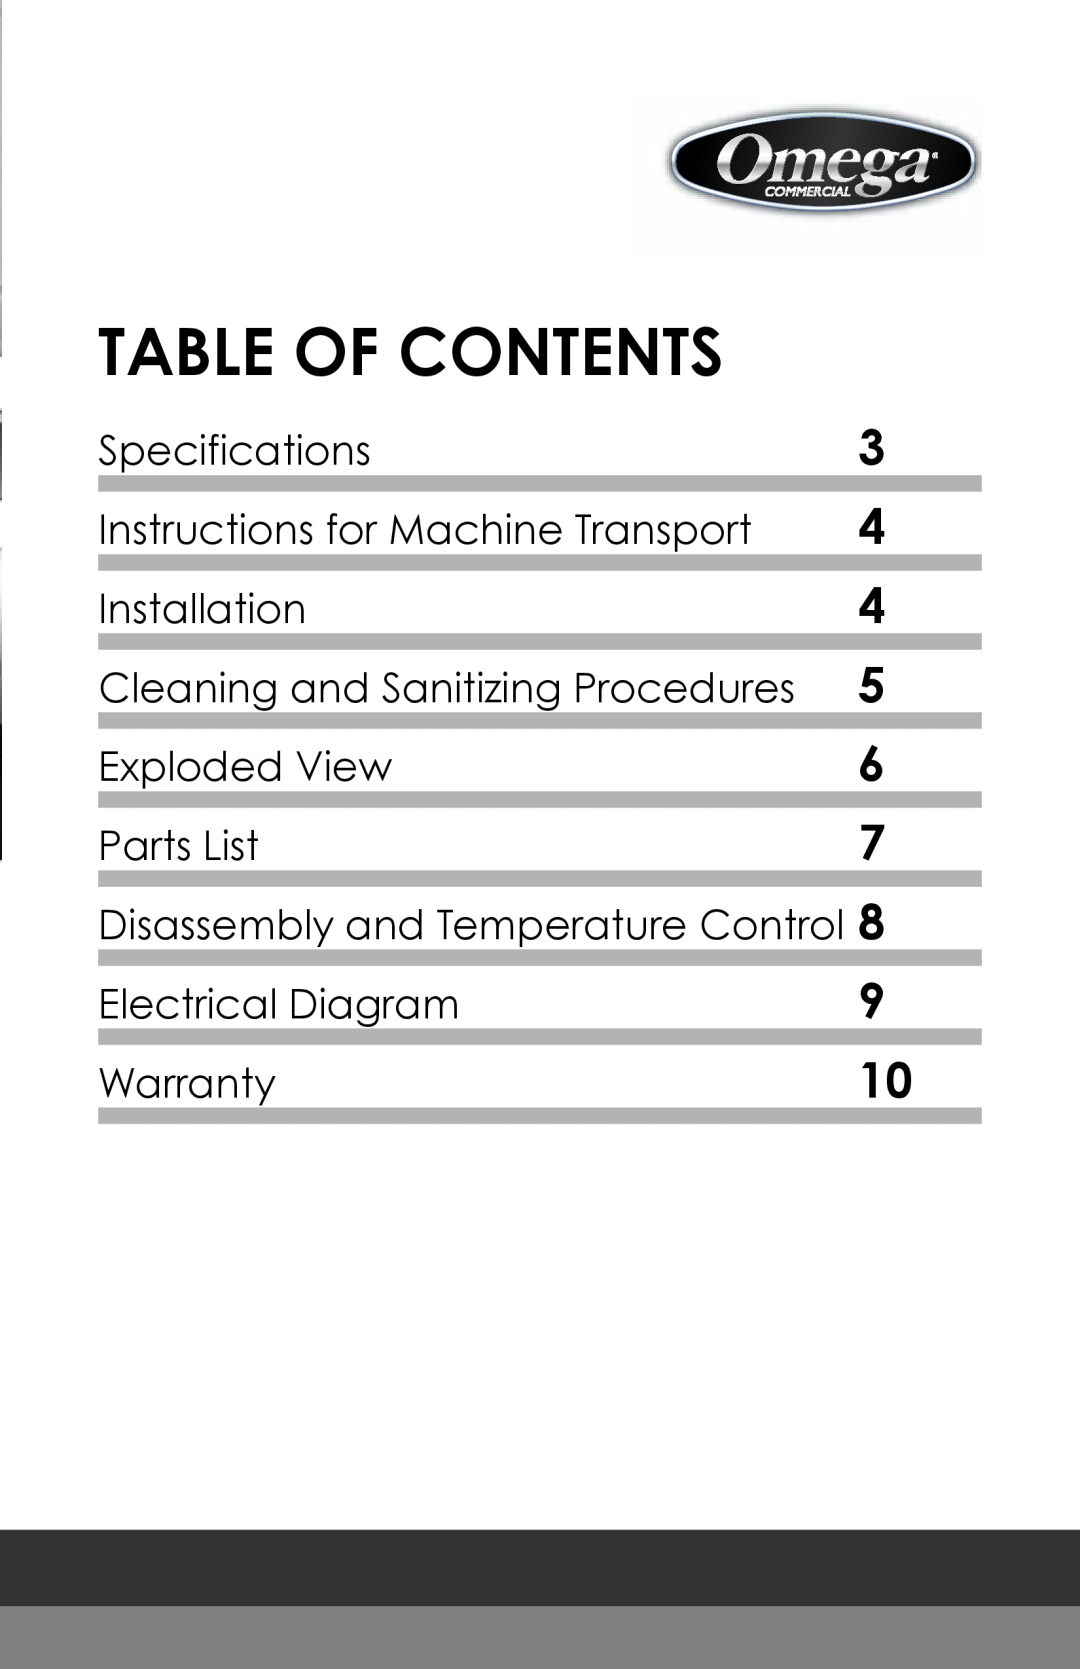 Omega OSD20 Table Of Contents, Specifications, Instructions for Machine Transport, Installation, Exploded View, Parts List 